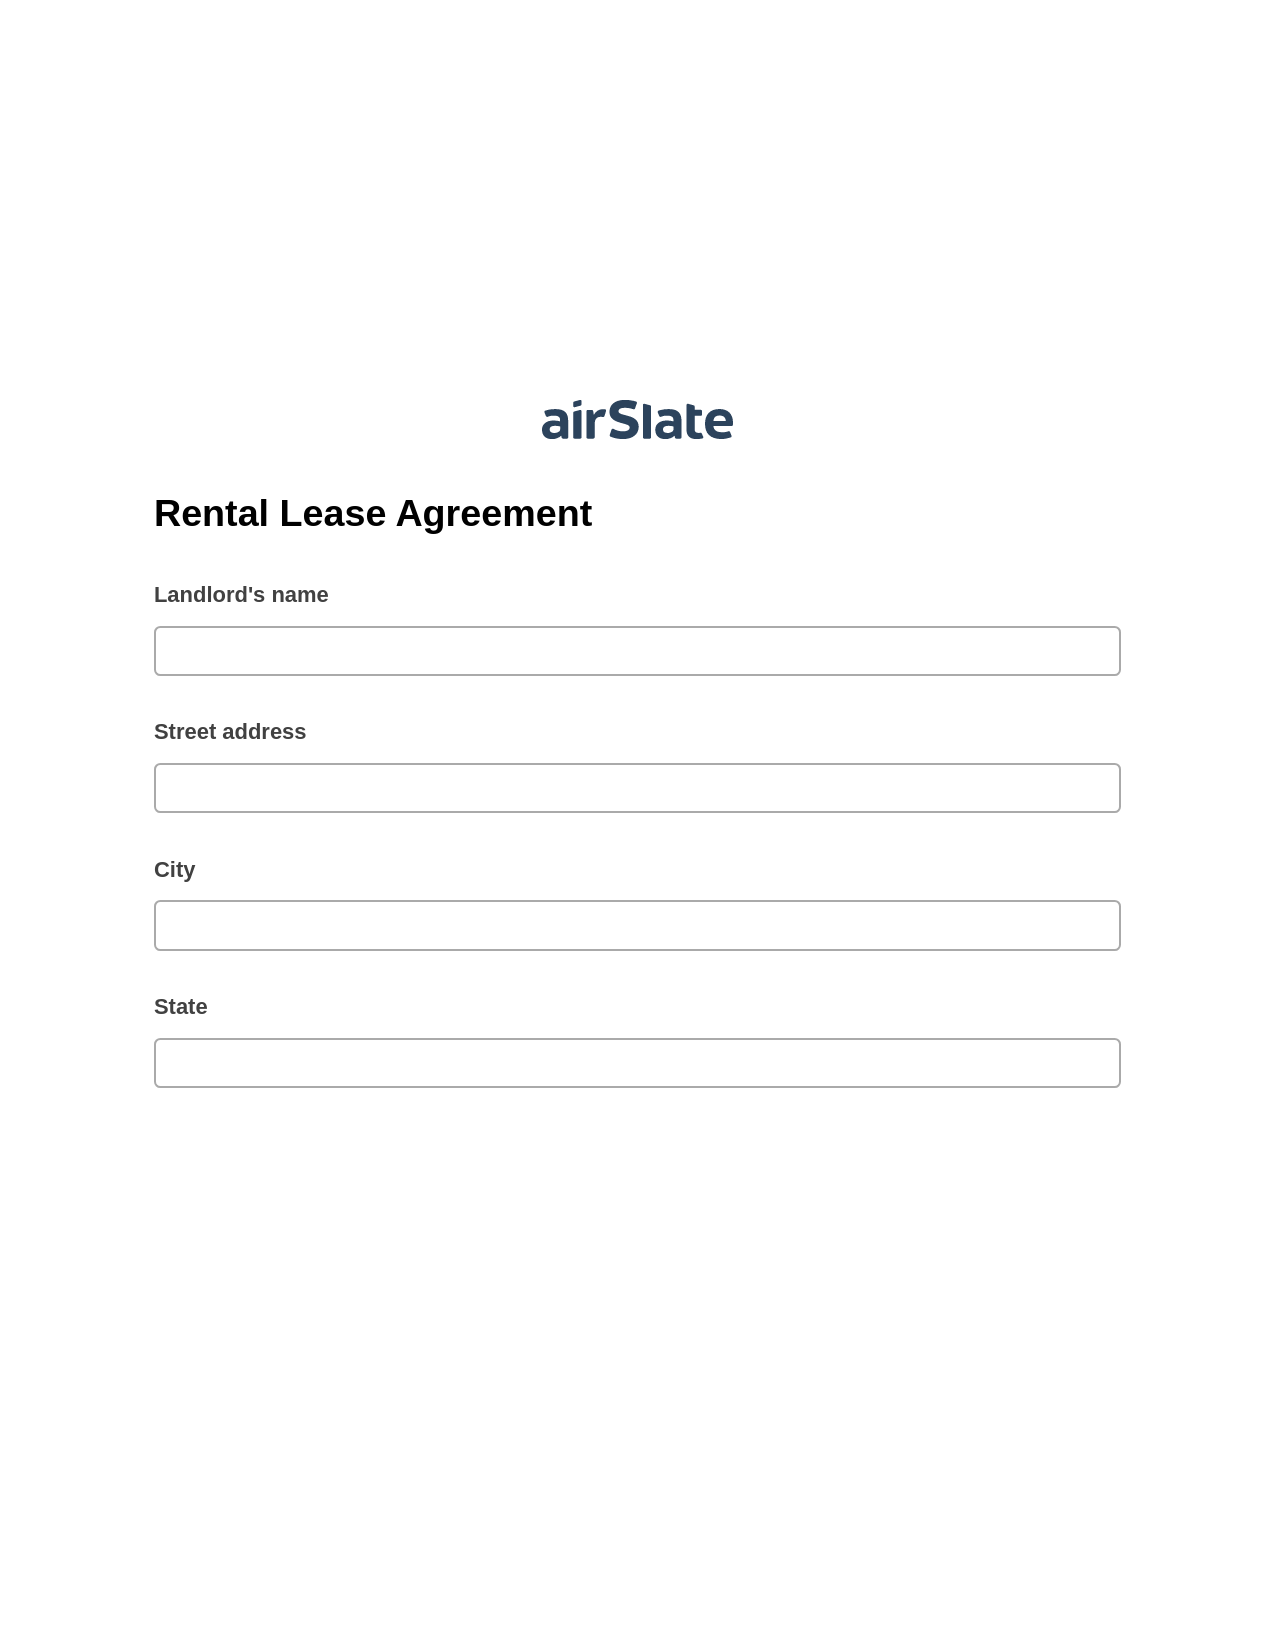 Rental Lease Agreement Pre-fill from Excel Spreadsheet Bot, Open as Role Bot, Export to Smartsheet